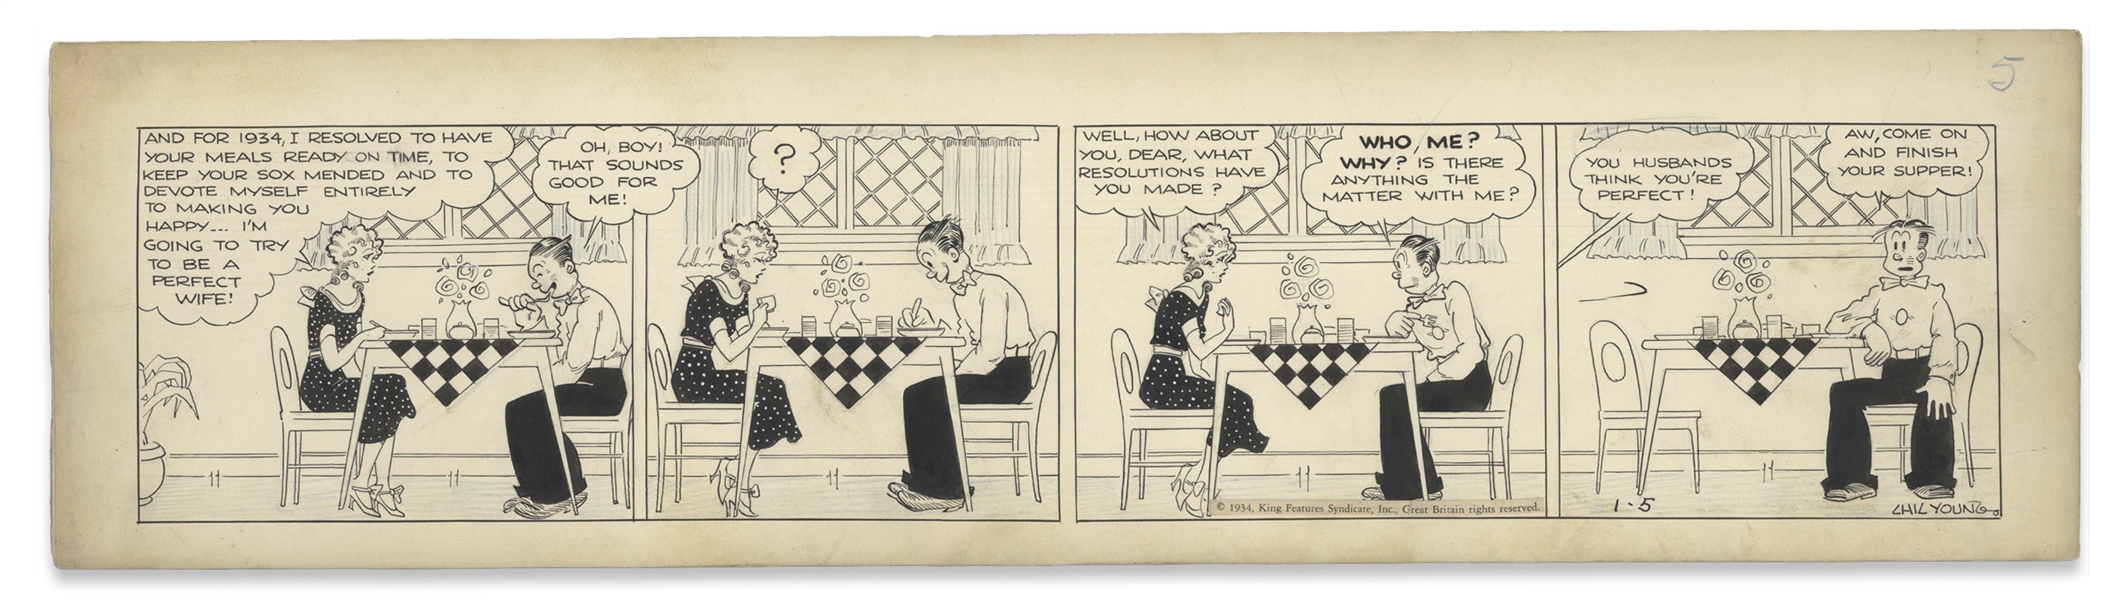 Chic Young Hand-Drawn ''Blondie'' Comic Strip From 1934 Titled ''Men Are So Conceited!'' -- Blondie Makes a New Year's Resolution to be the ''Perfect Wife!''